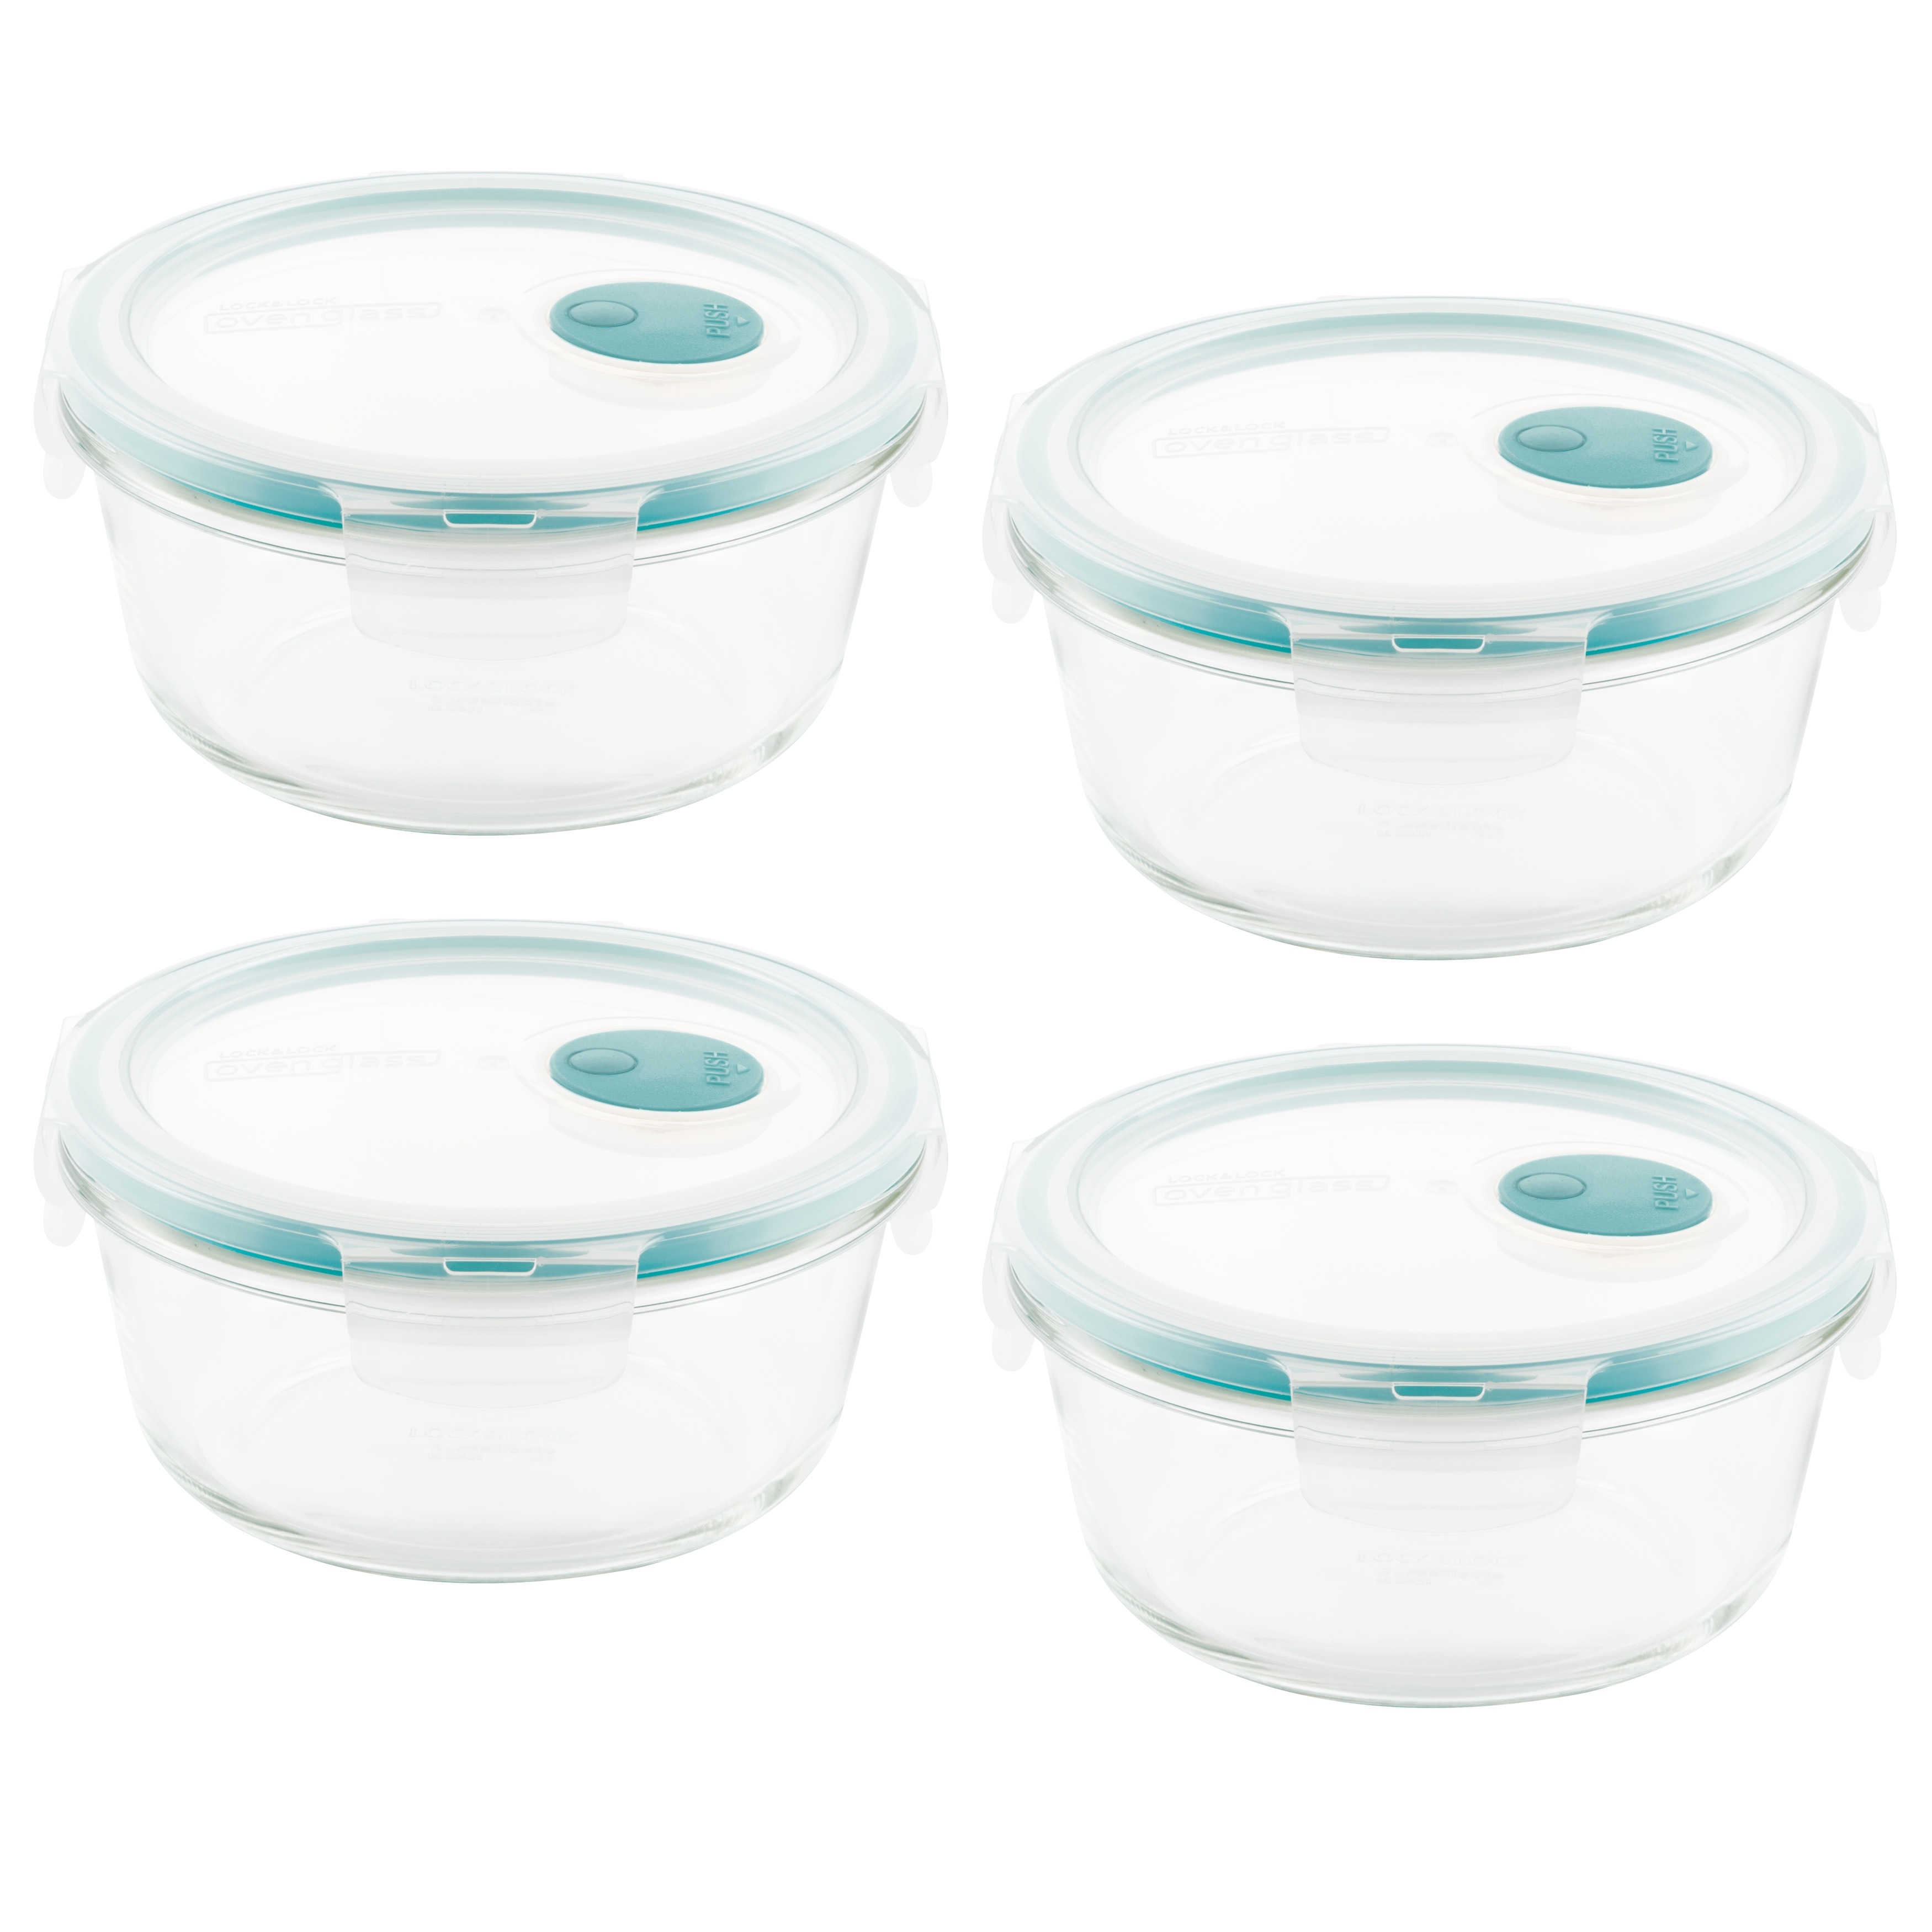 https://ak1.ostkcdn.com/images/products/is/images/direct/ba4f713ad606d6594438ebbfdcc1f39f105f1997/LocknLock-Purely-Better-Vented-Glass-Food-Storage-Containers%2C-22-Ounce%2C-Set-of-Four.jpg